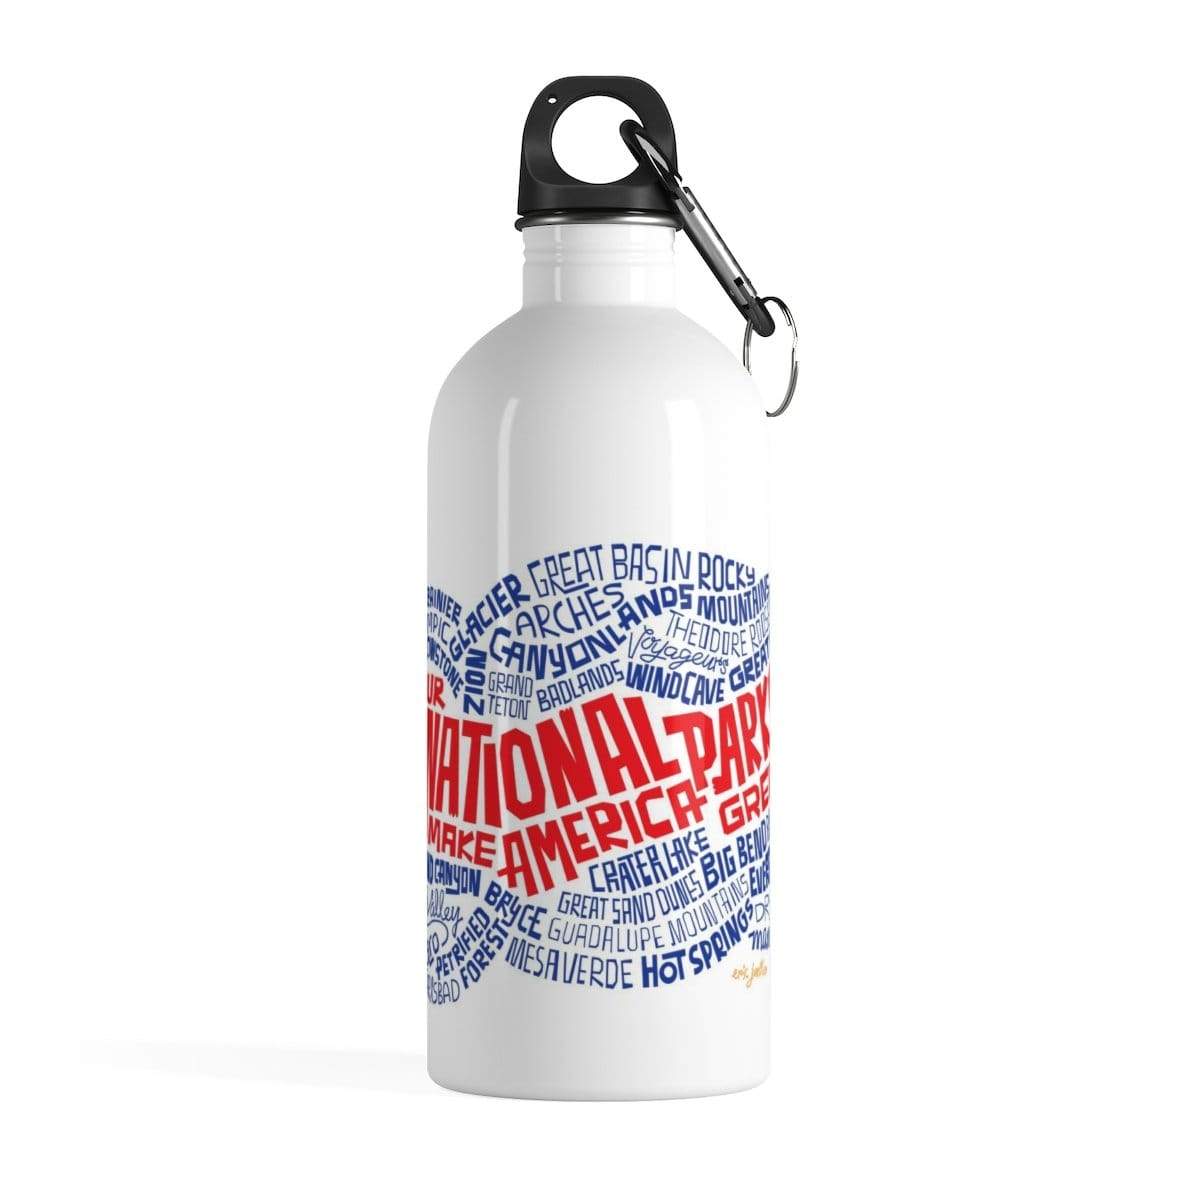 https://cdn.shopify.com/s/files/1/0499/4781/products/national-parks-stainless-steel-water-bottle-by-eric-junker-14oz-water-bottle-see-america-7289470091367.jpg?v=1555433800